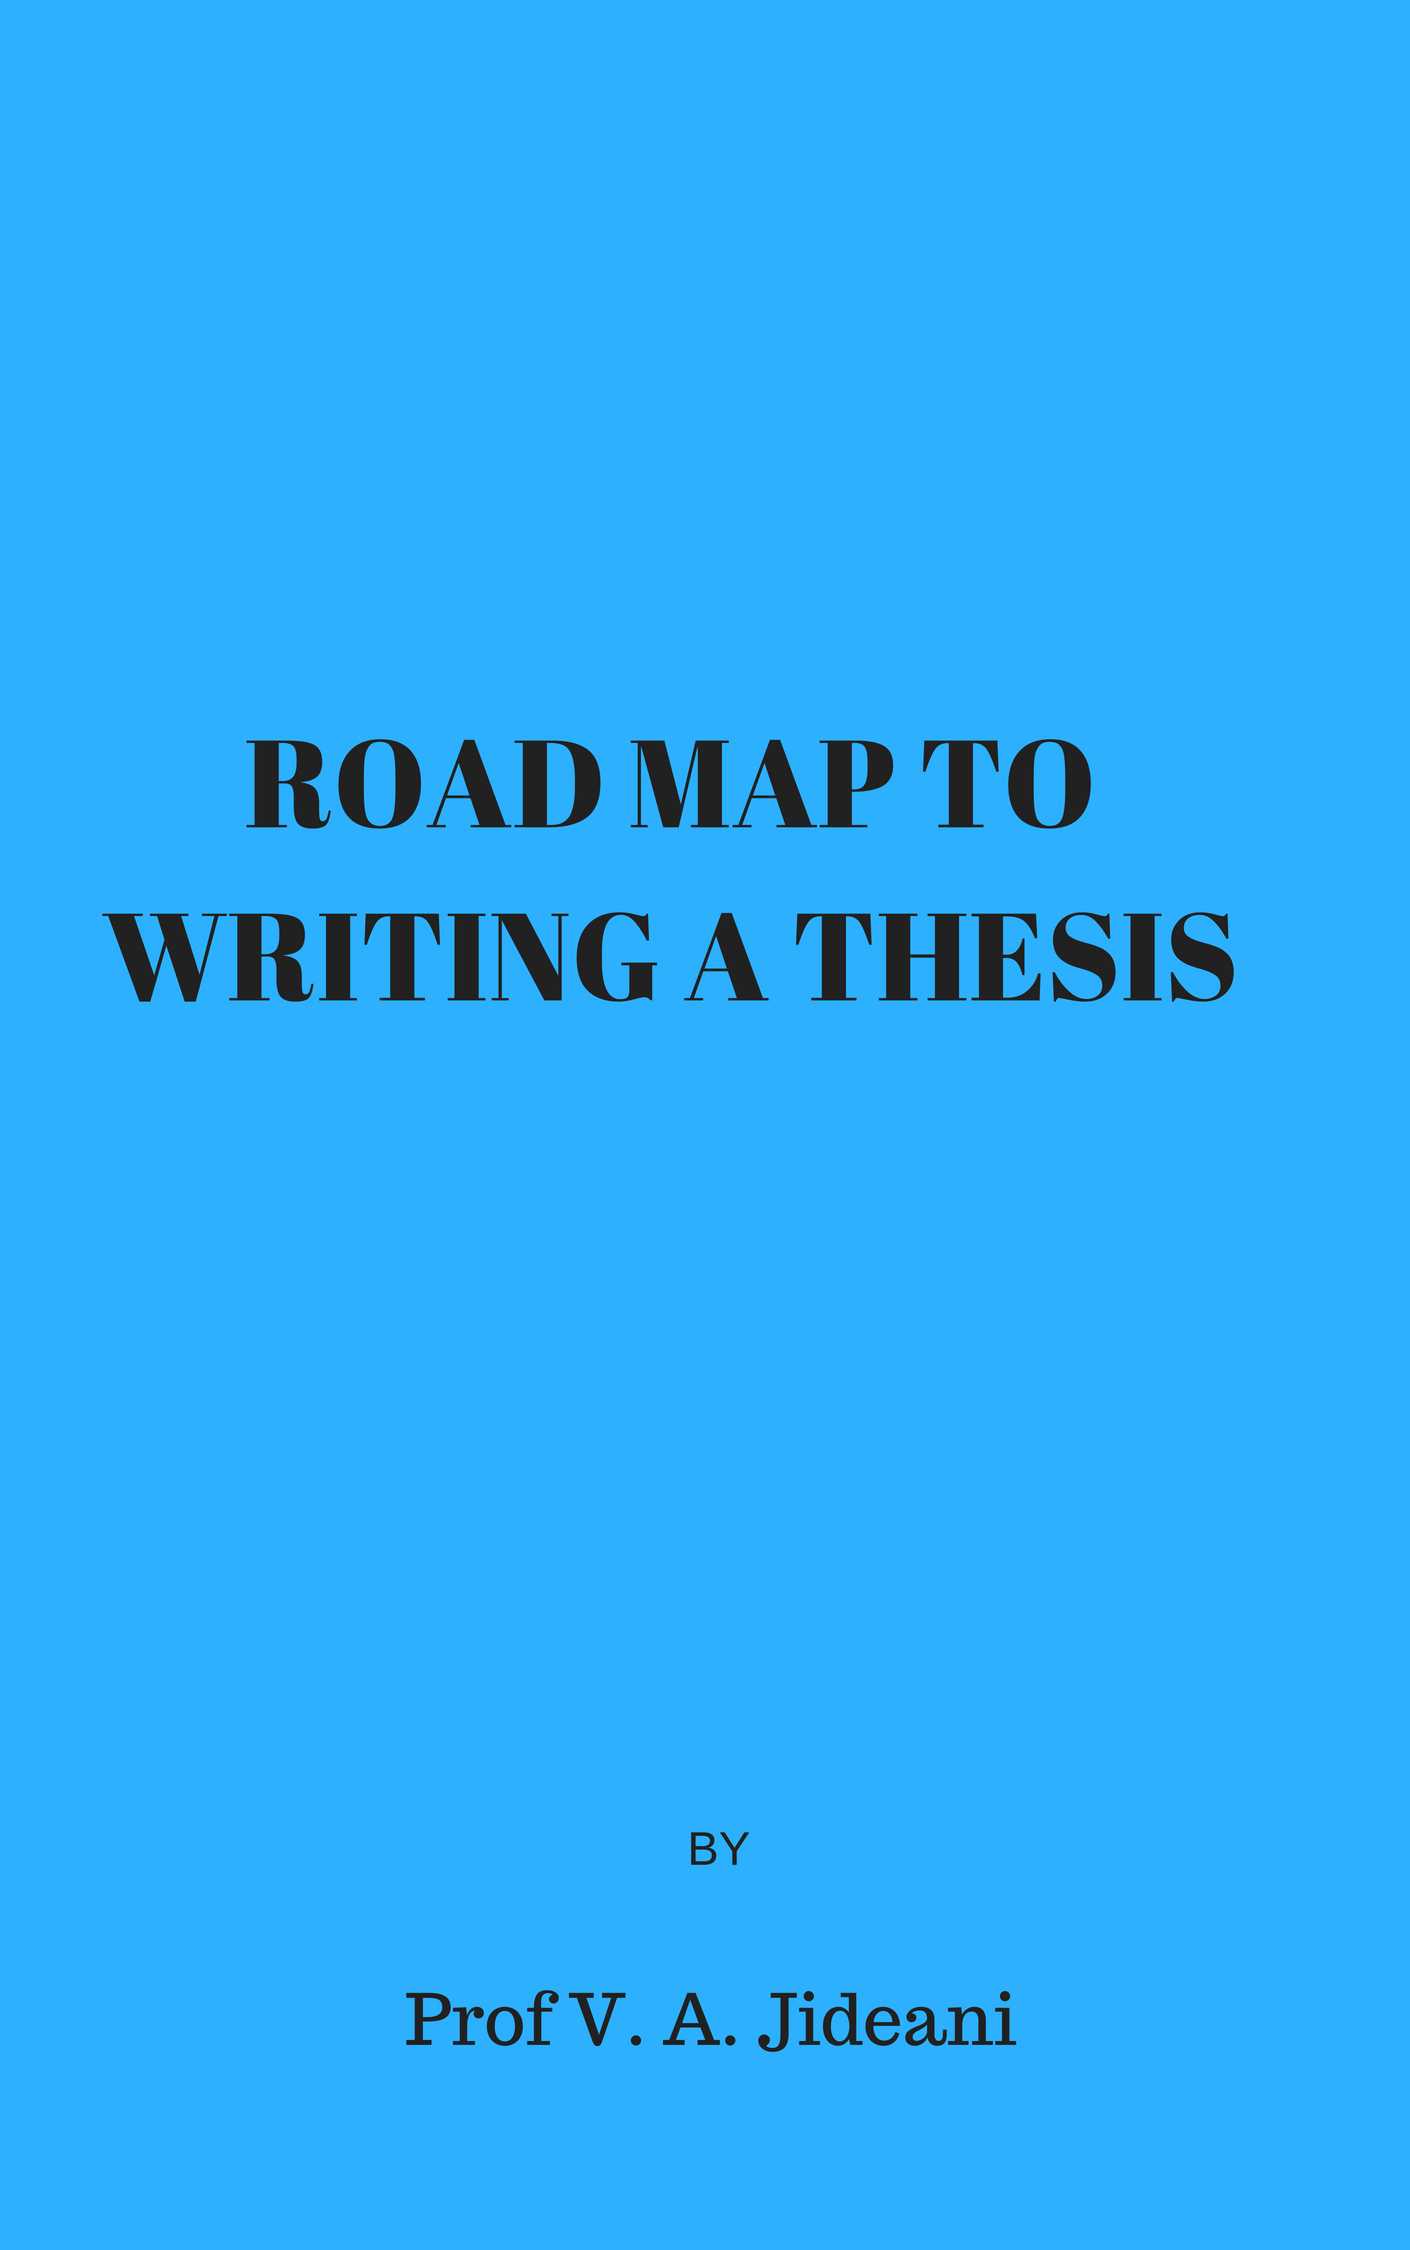 A Year Of Dissertation Research On The Road